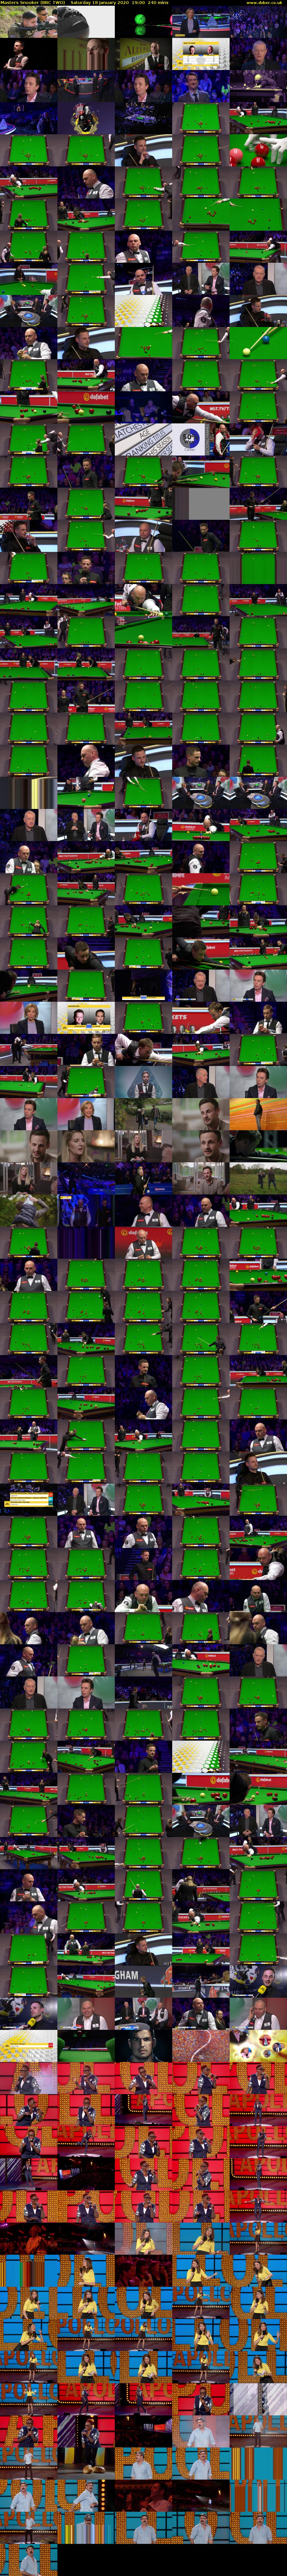 Masters Snooker (BBC TWO) Saturday 18 January 2020 19:00 - 23:00